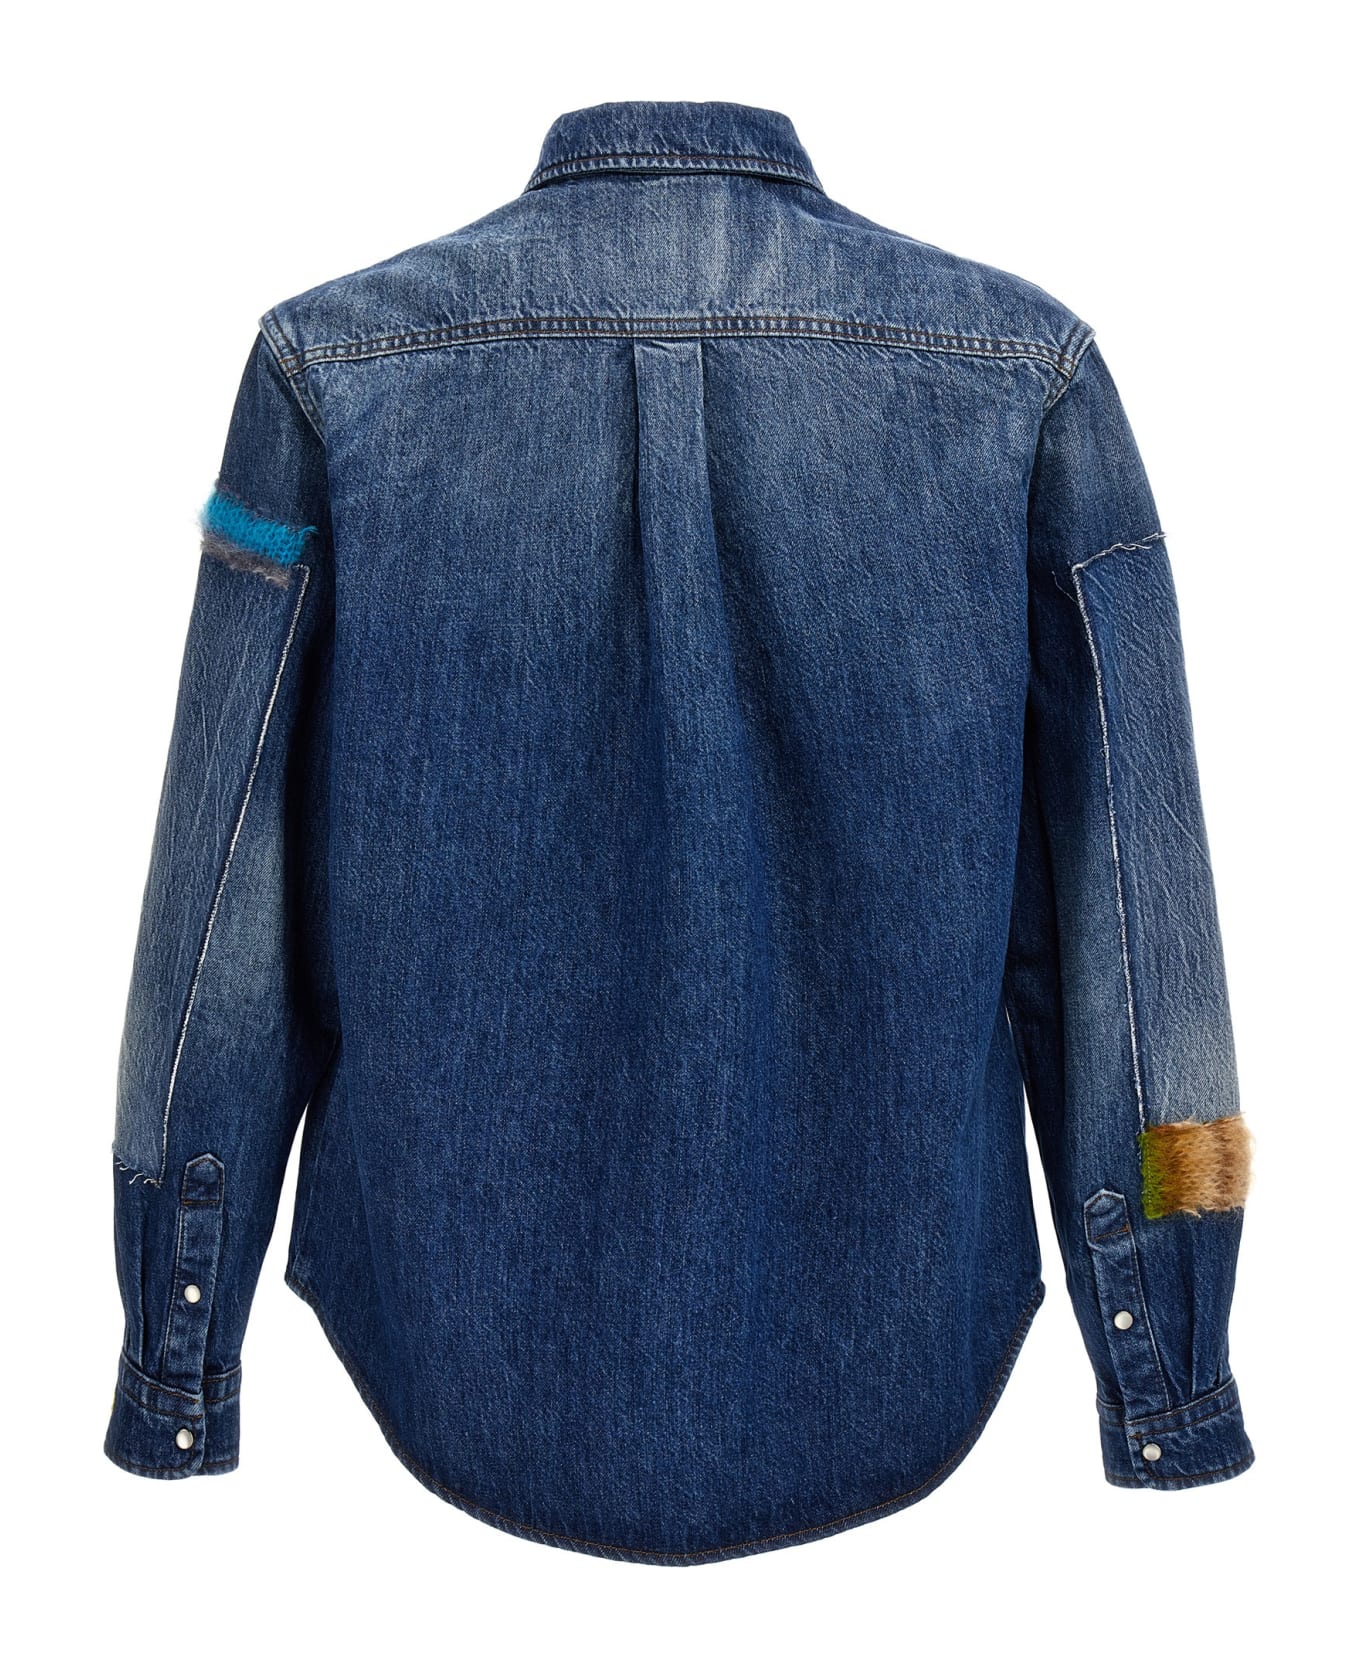 Marni Denim Shirt, Embroidery And Patches - Blu シャツ